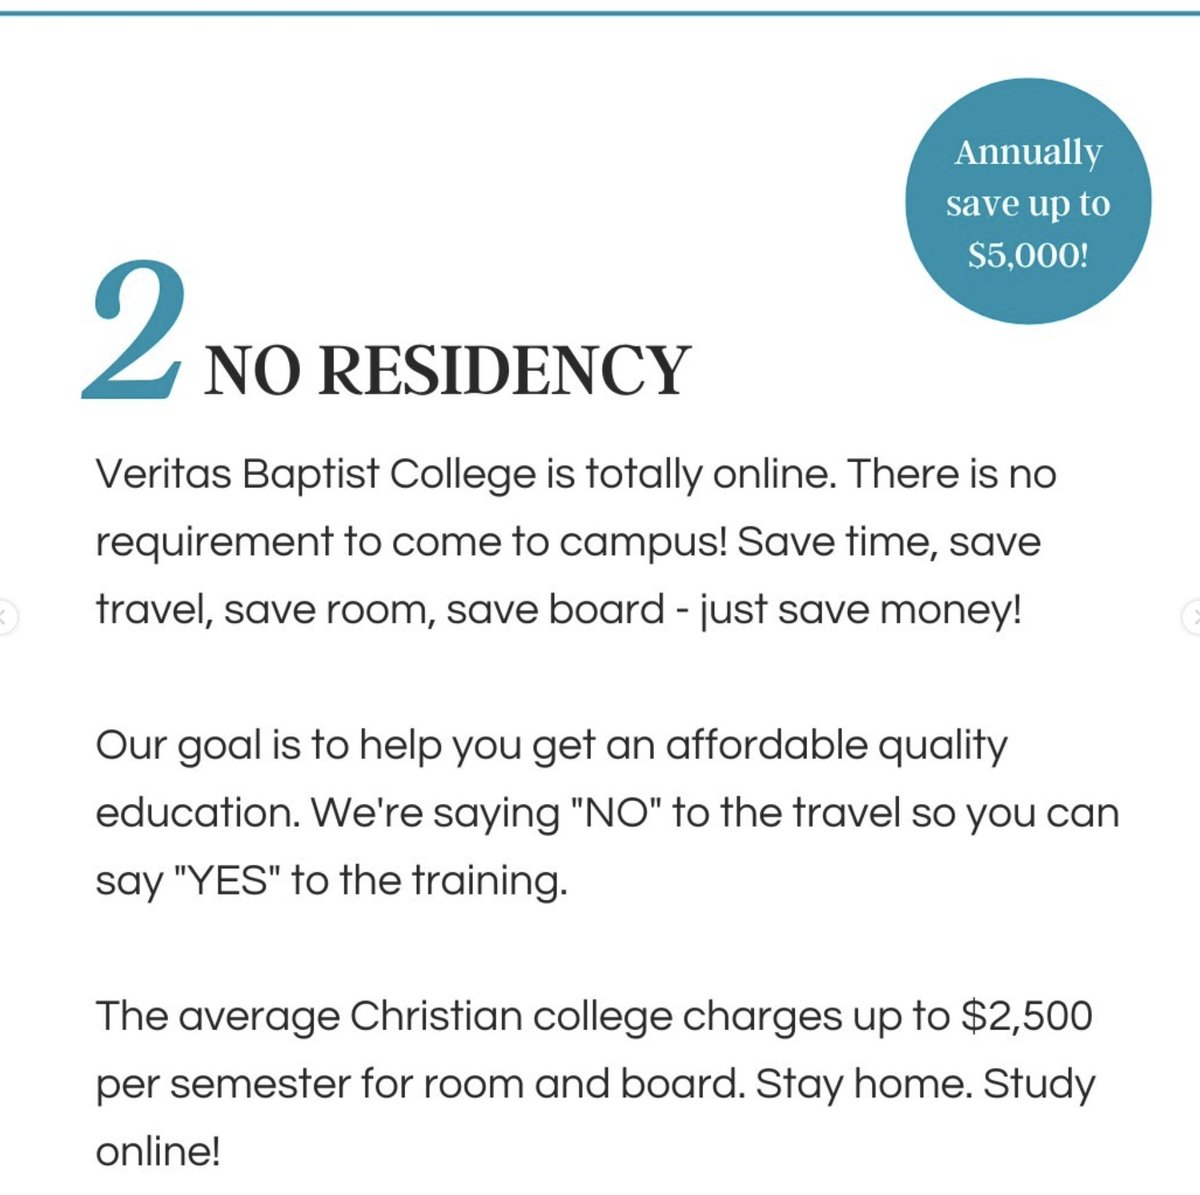 We've said 'NO' to the travel expenses so you could say 'YES' to the training! Save the room and board expenses for something else!

#StudyAtHome #ServeInYourChurch #TruthMatters #VeritasBaptistCollege